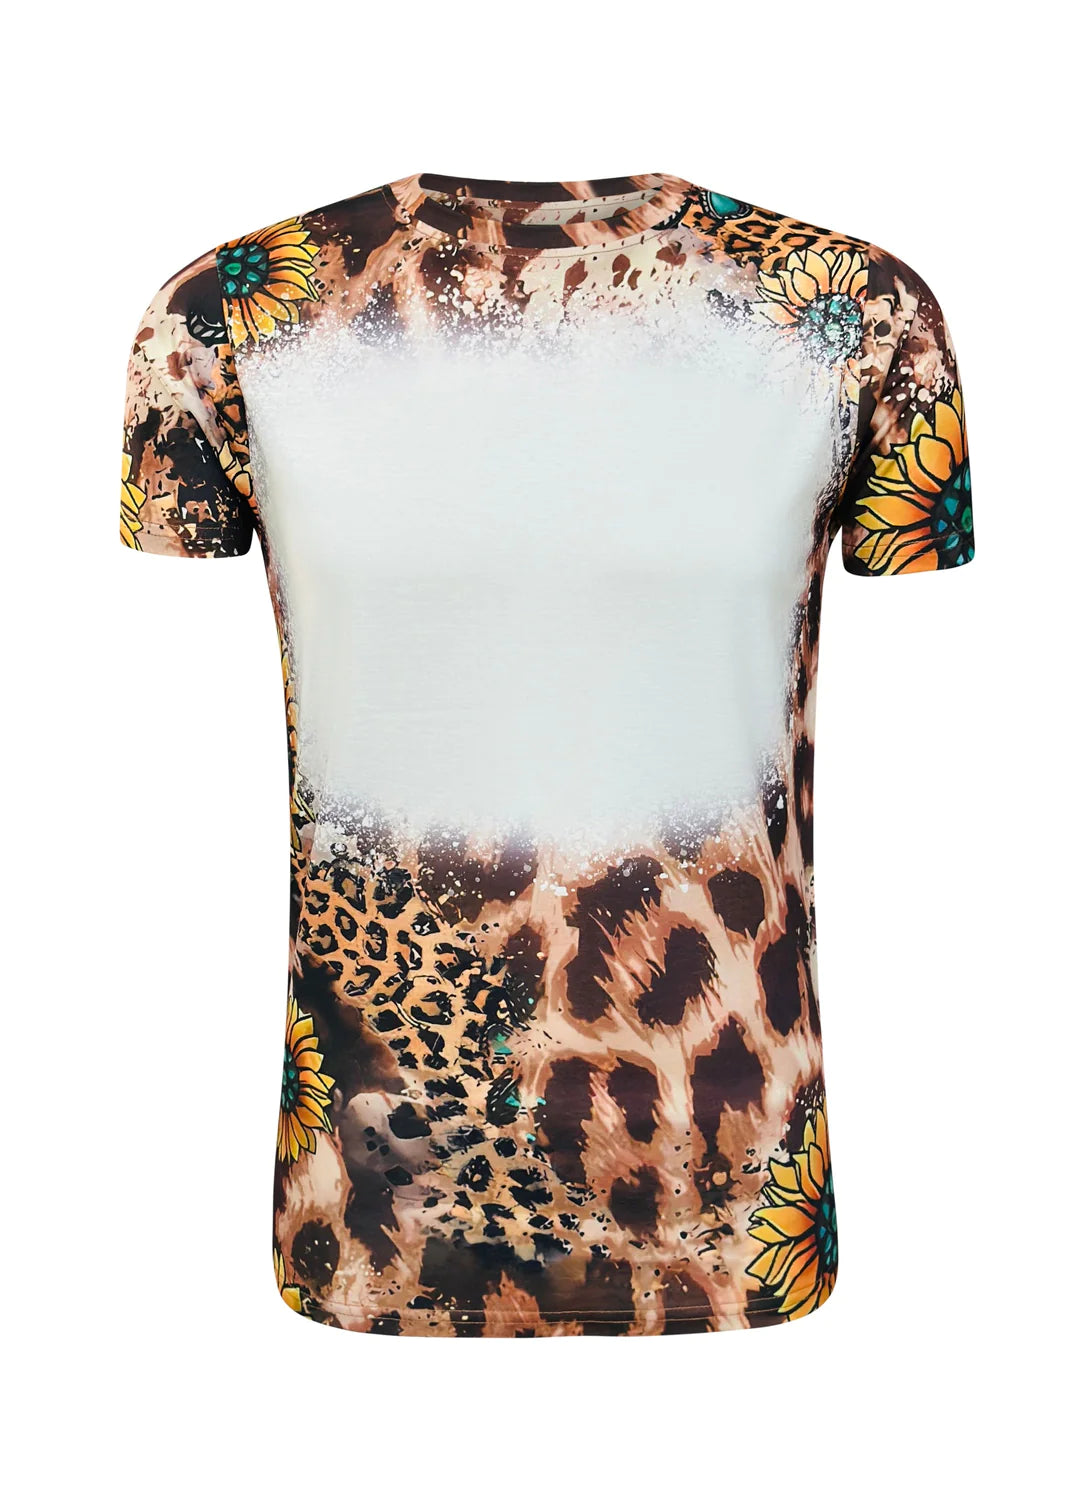 FAUX Bleached Polyester Blank Shirt | Sunflower and Cheetah Sublimation T-Shirt